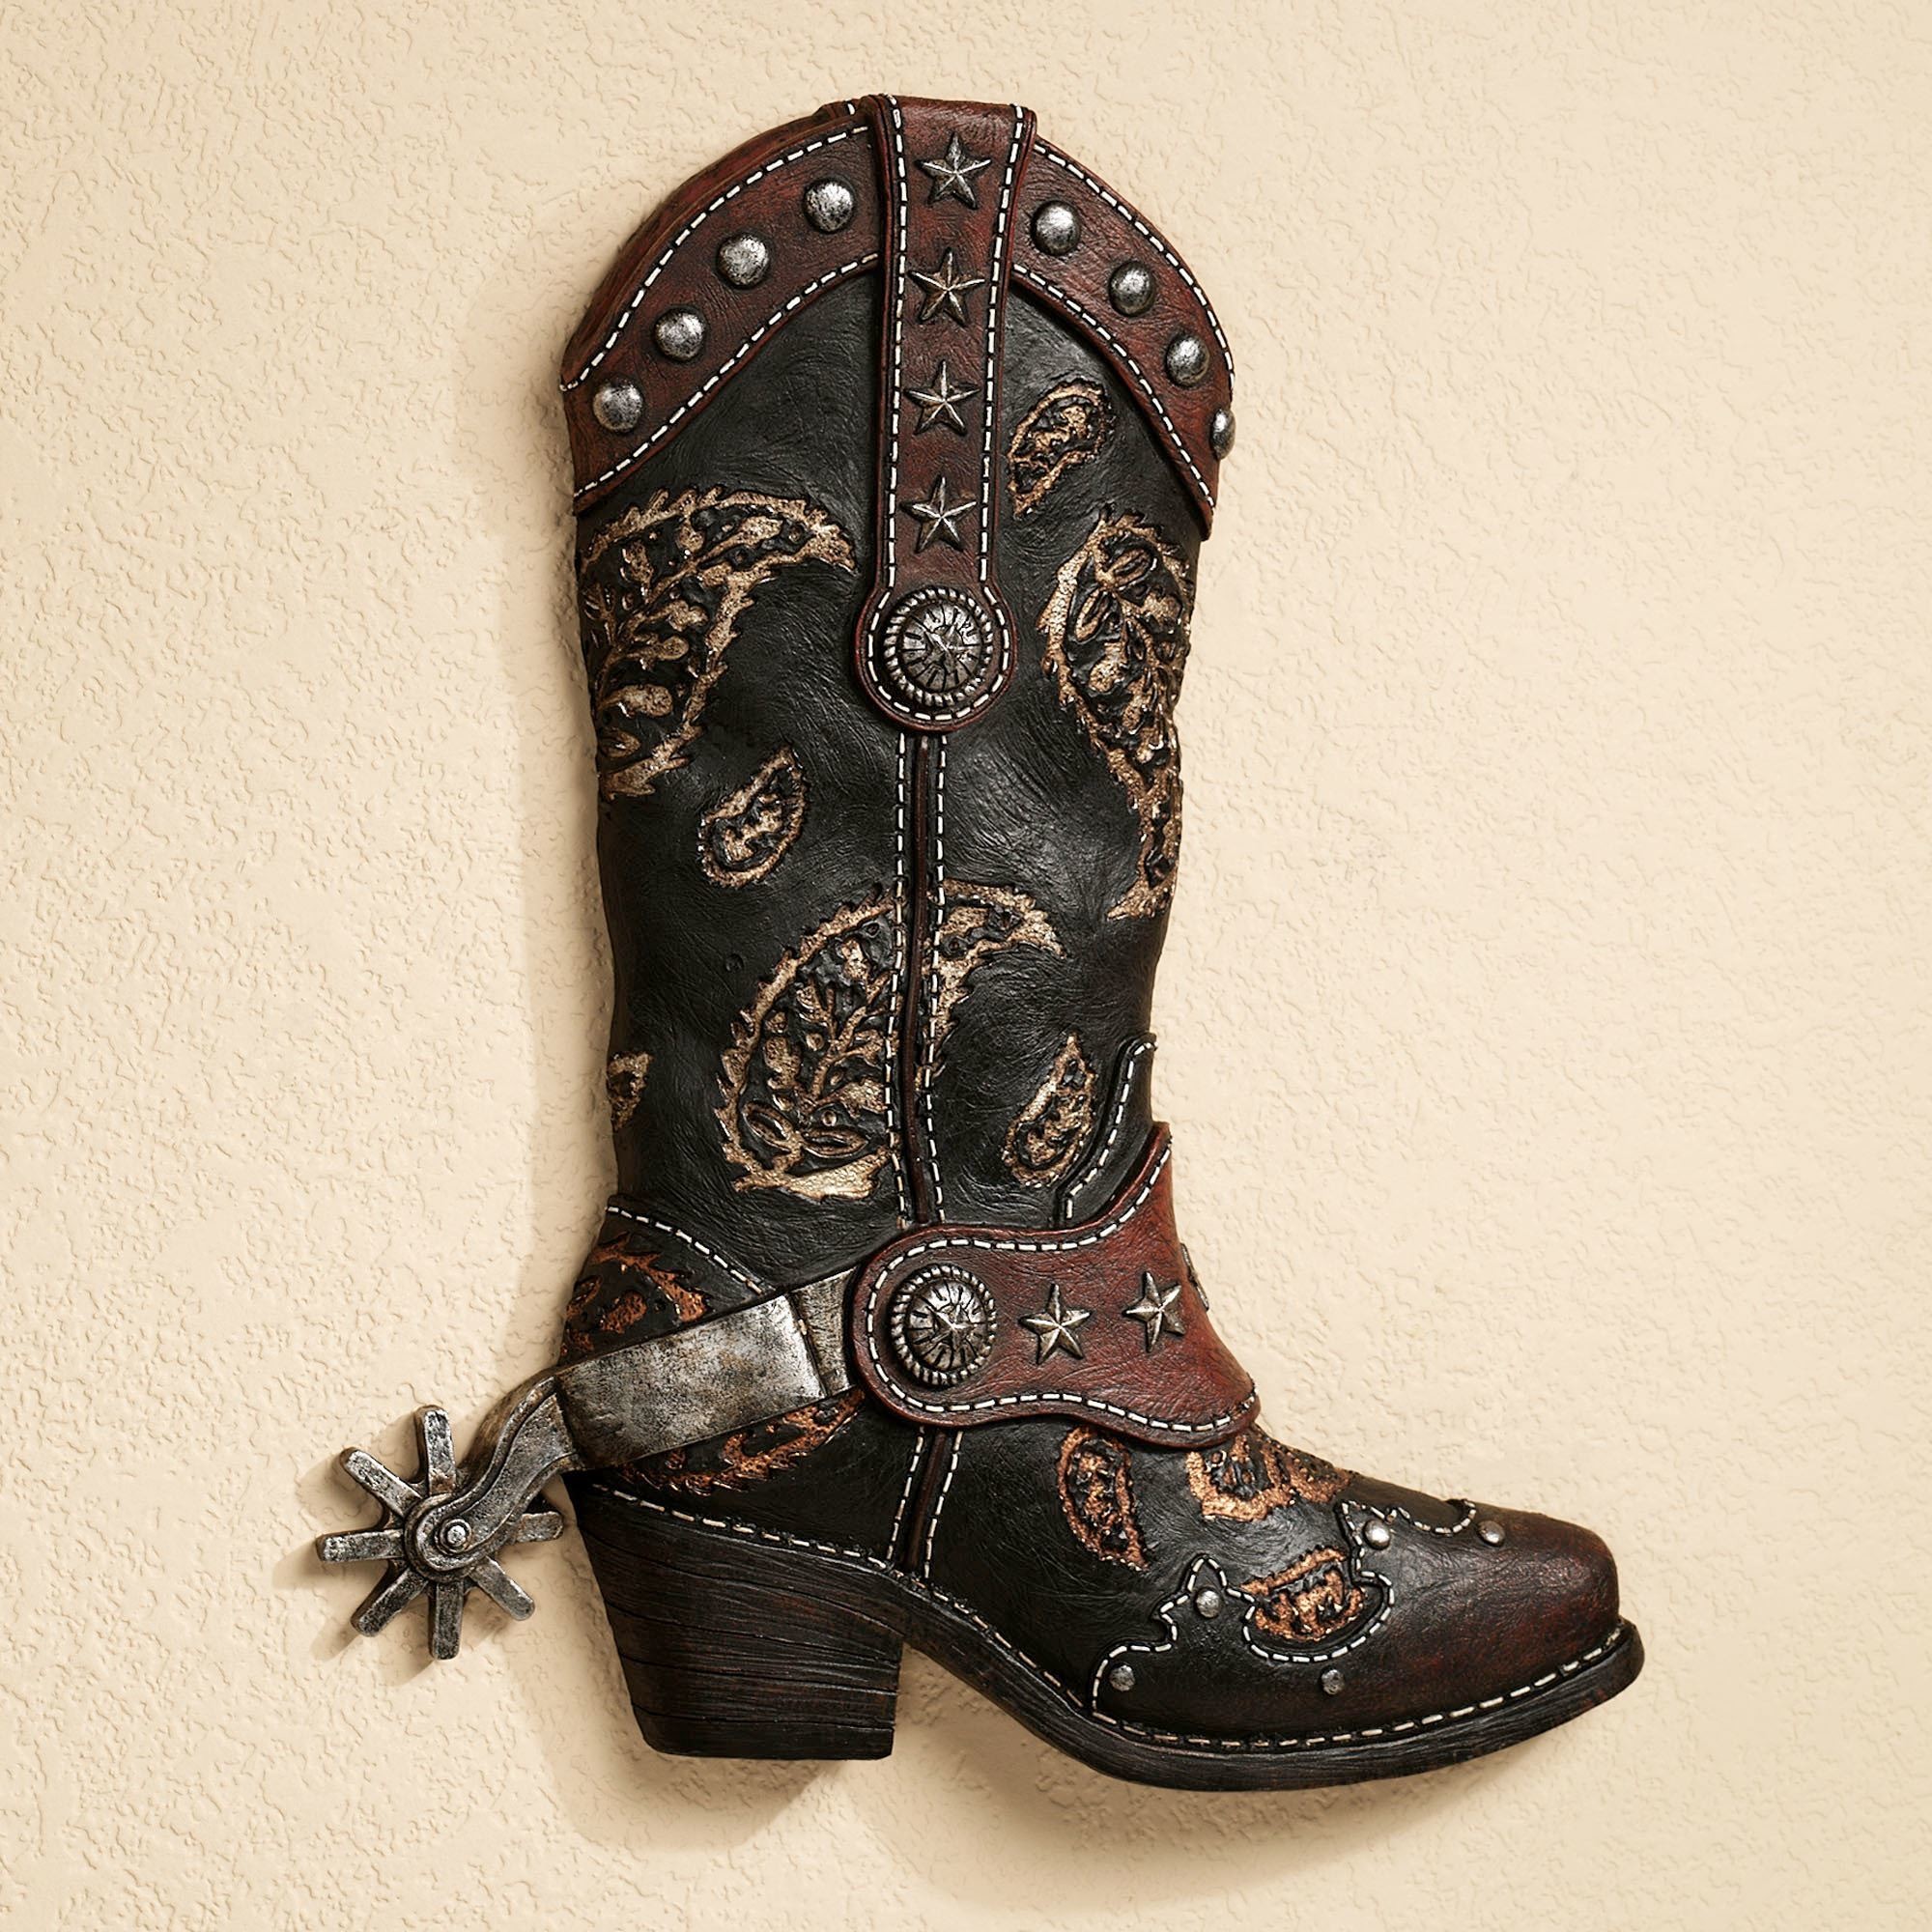 2000x2000 Western Boot Wall Art Black. Click to expand